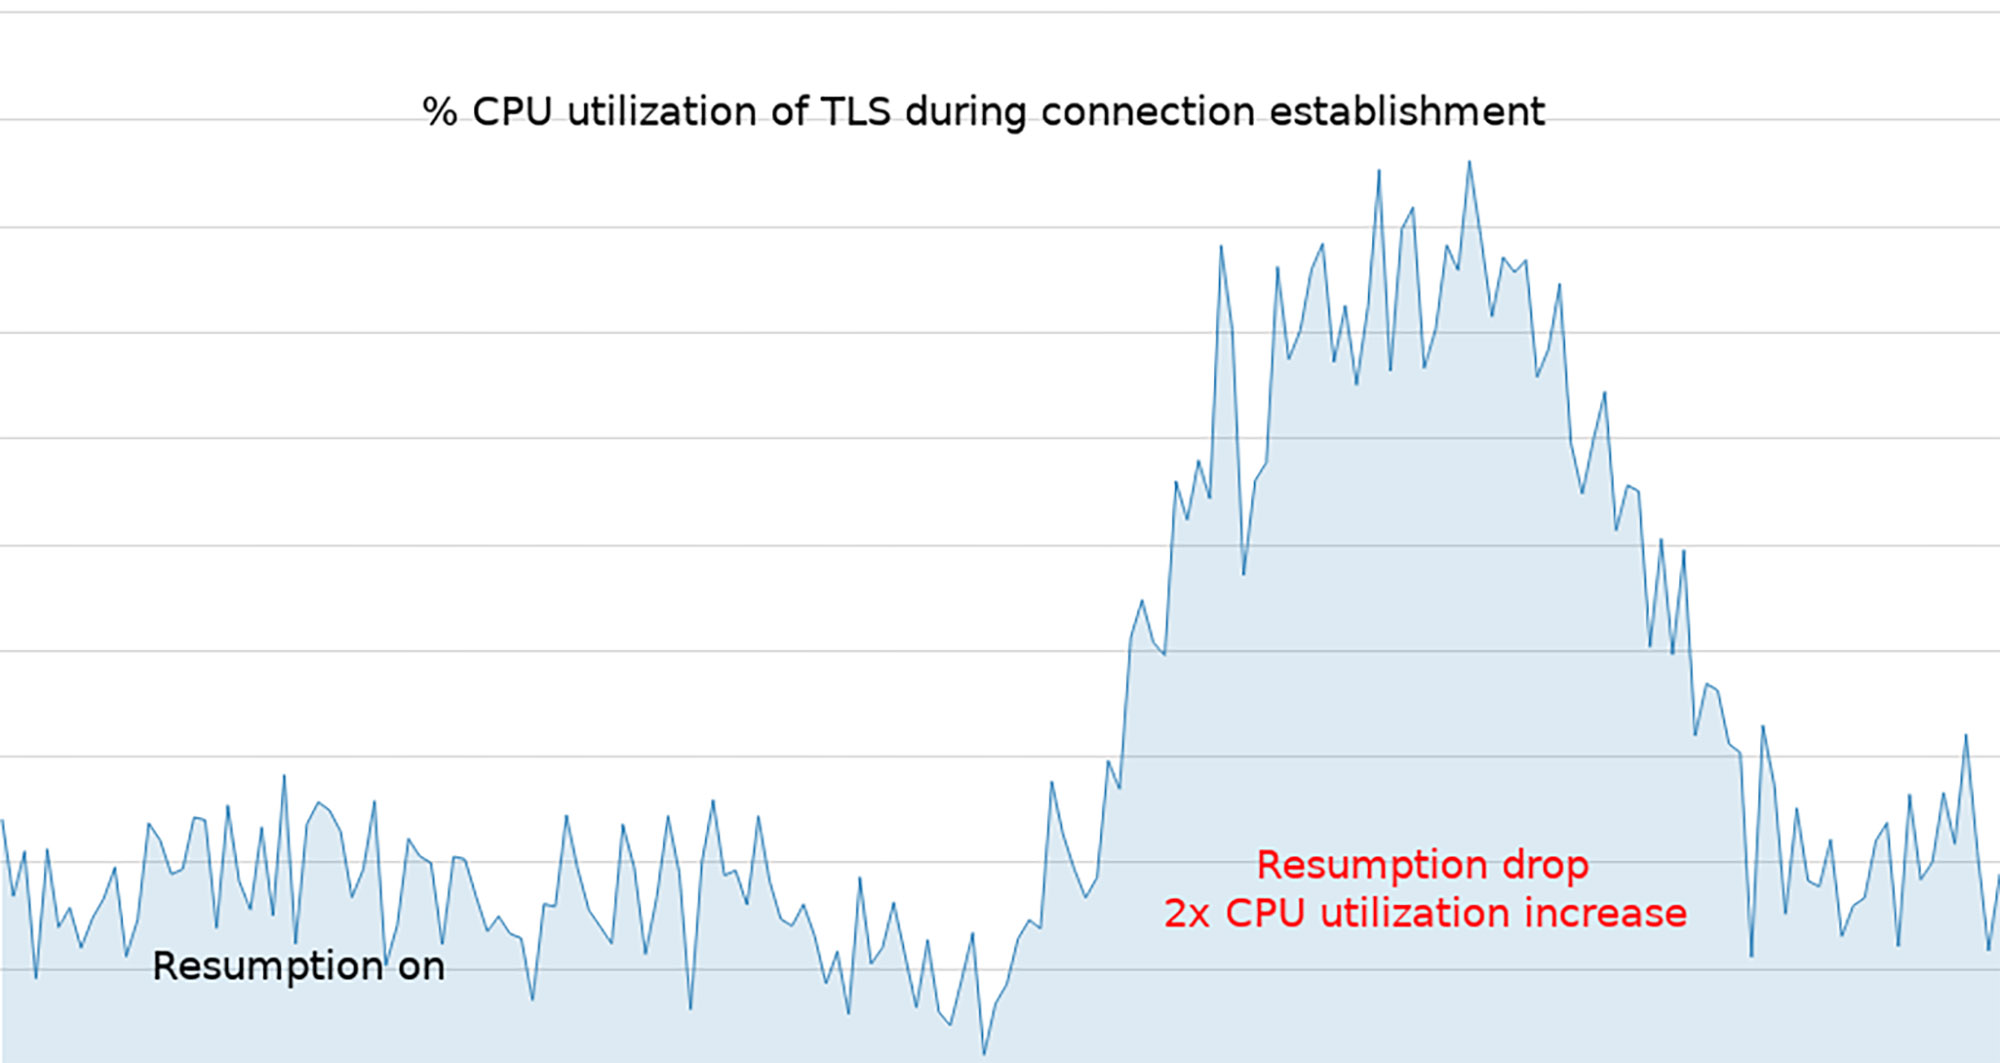 Service encryption architecture: Graph showing CPU utilization when we tested a quick rotation of STEKs (which temporarily lowered the resumption rate).